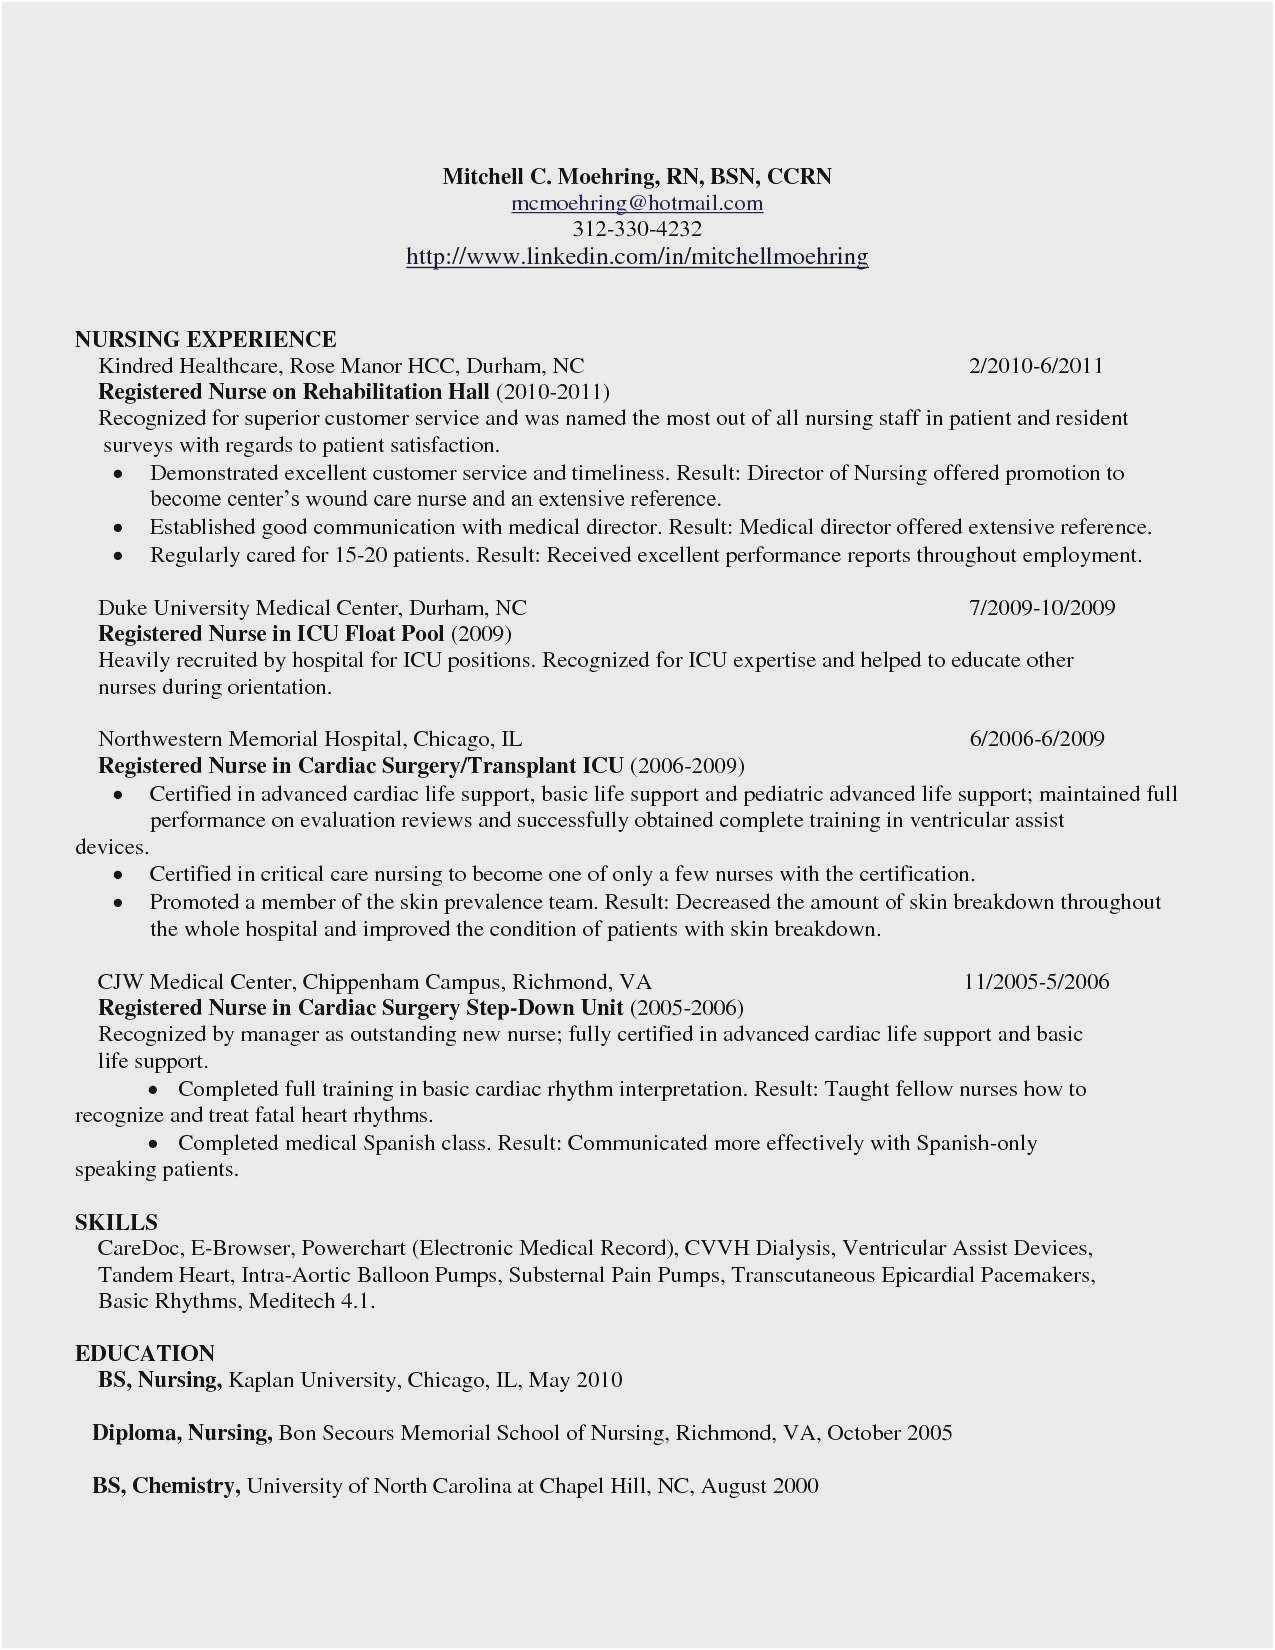 Sample Resume for Administrative assistant Position with No Experience Free Collection 51 Resume with No Experience 2019